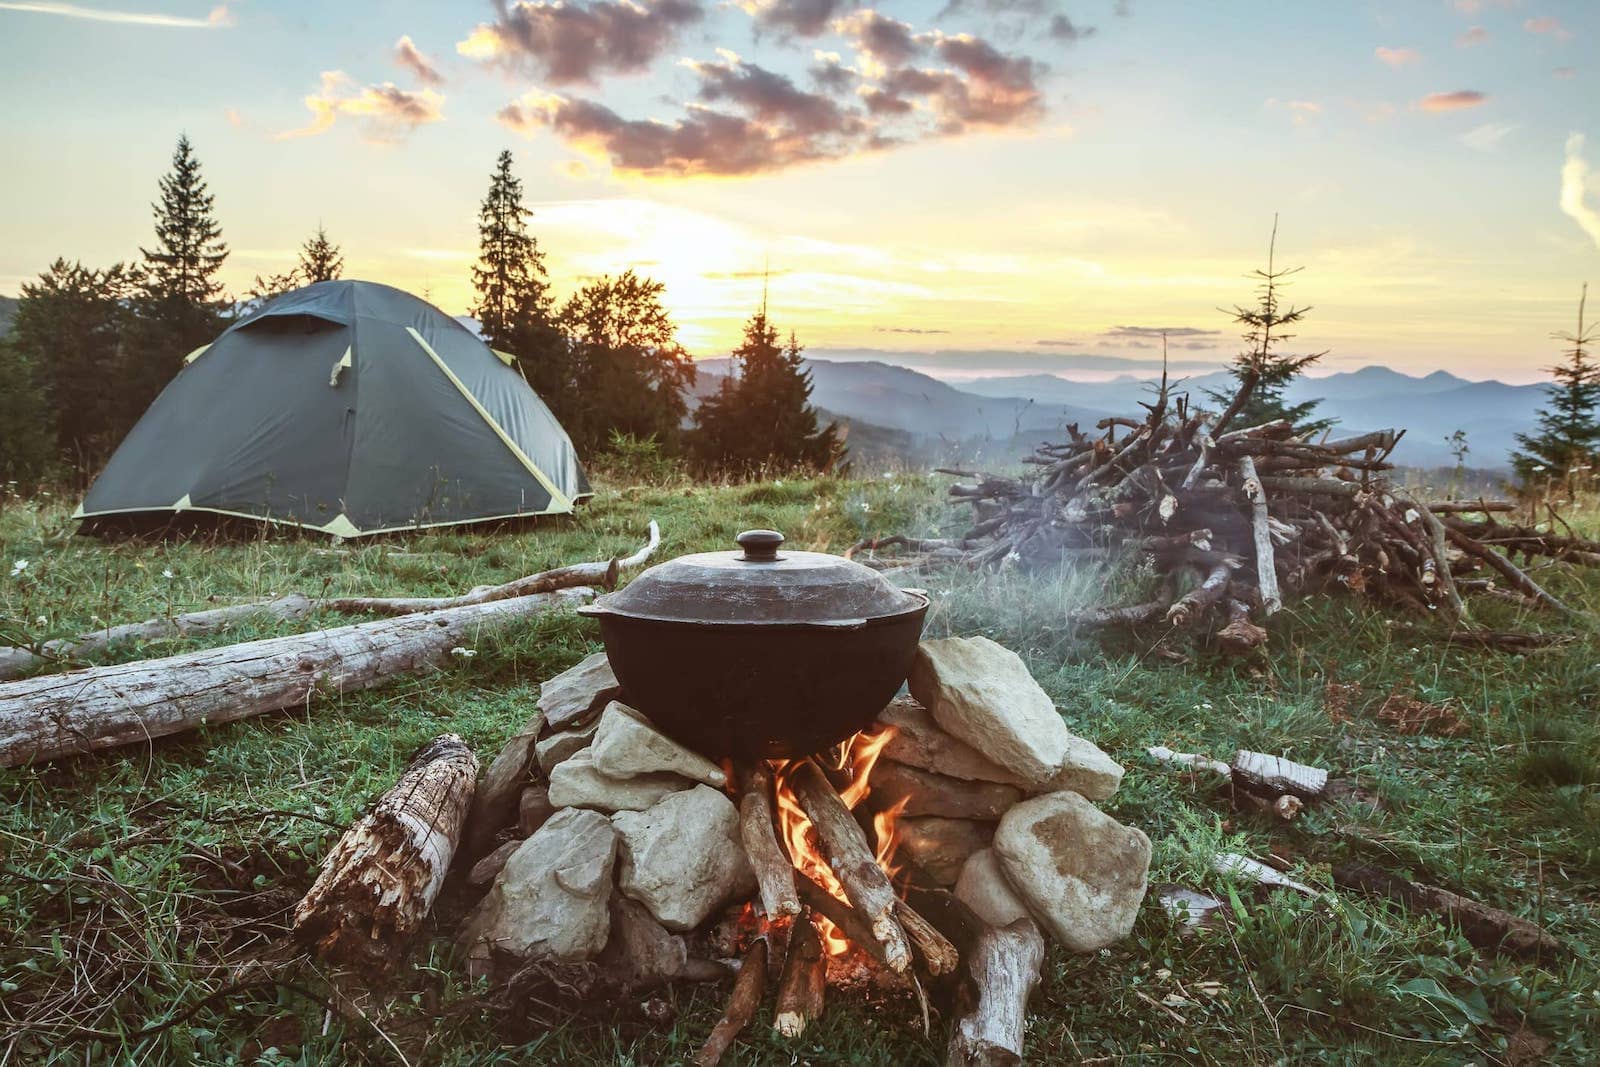 REI Camping Checklist - Things You Need for Camping Necessities - List of Items to Bring